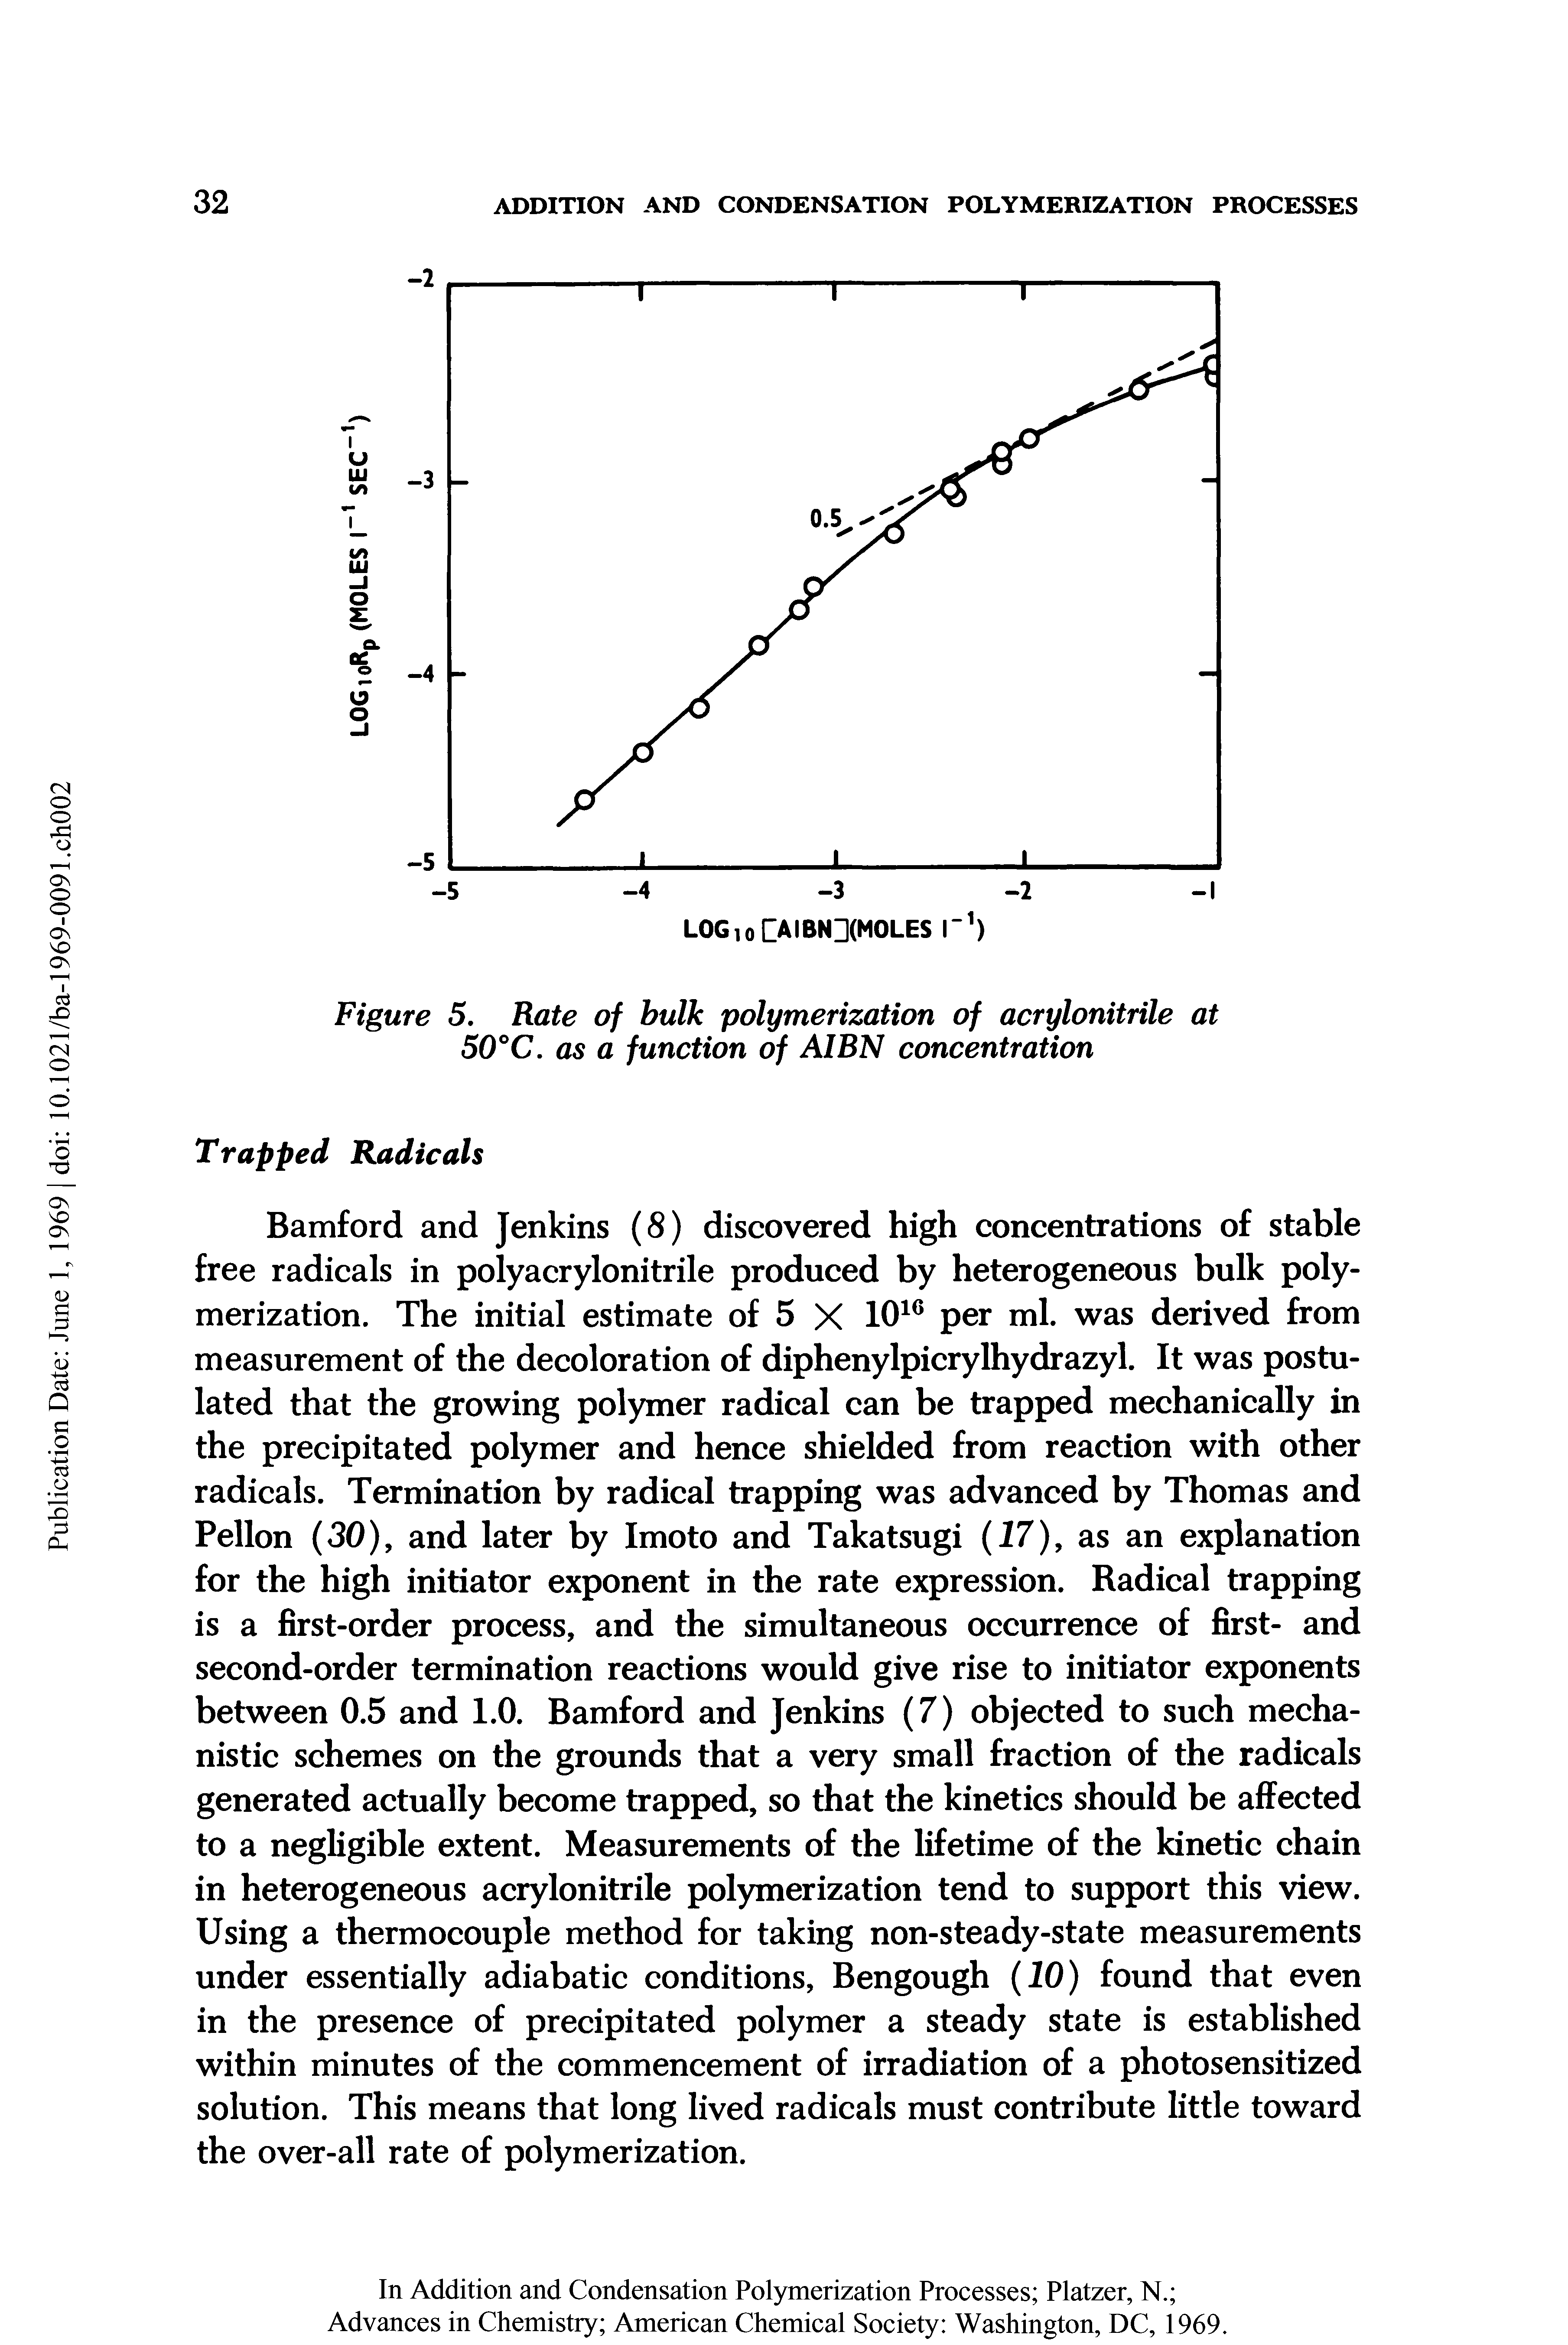 Figure 5. Rate of bulk polymerization of acrylonitrile at 50°C. as a function of AIBN concentration...